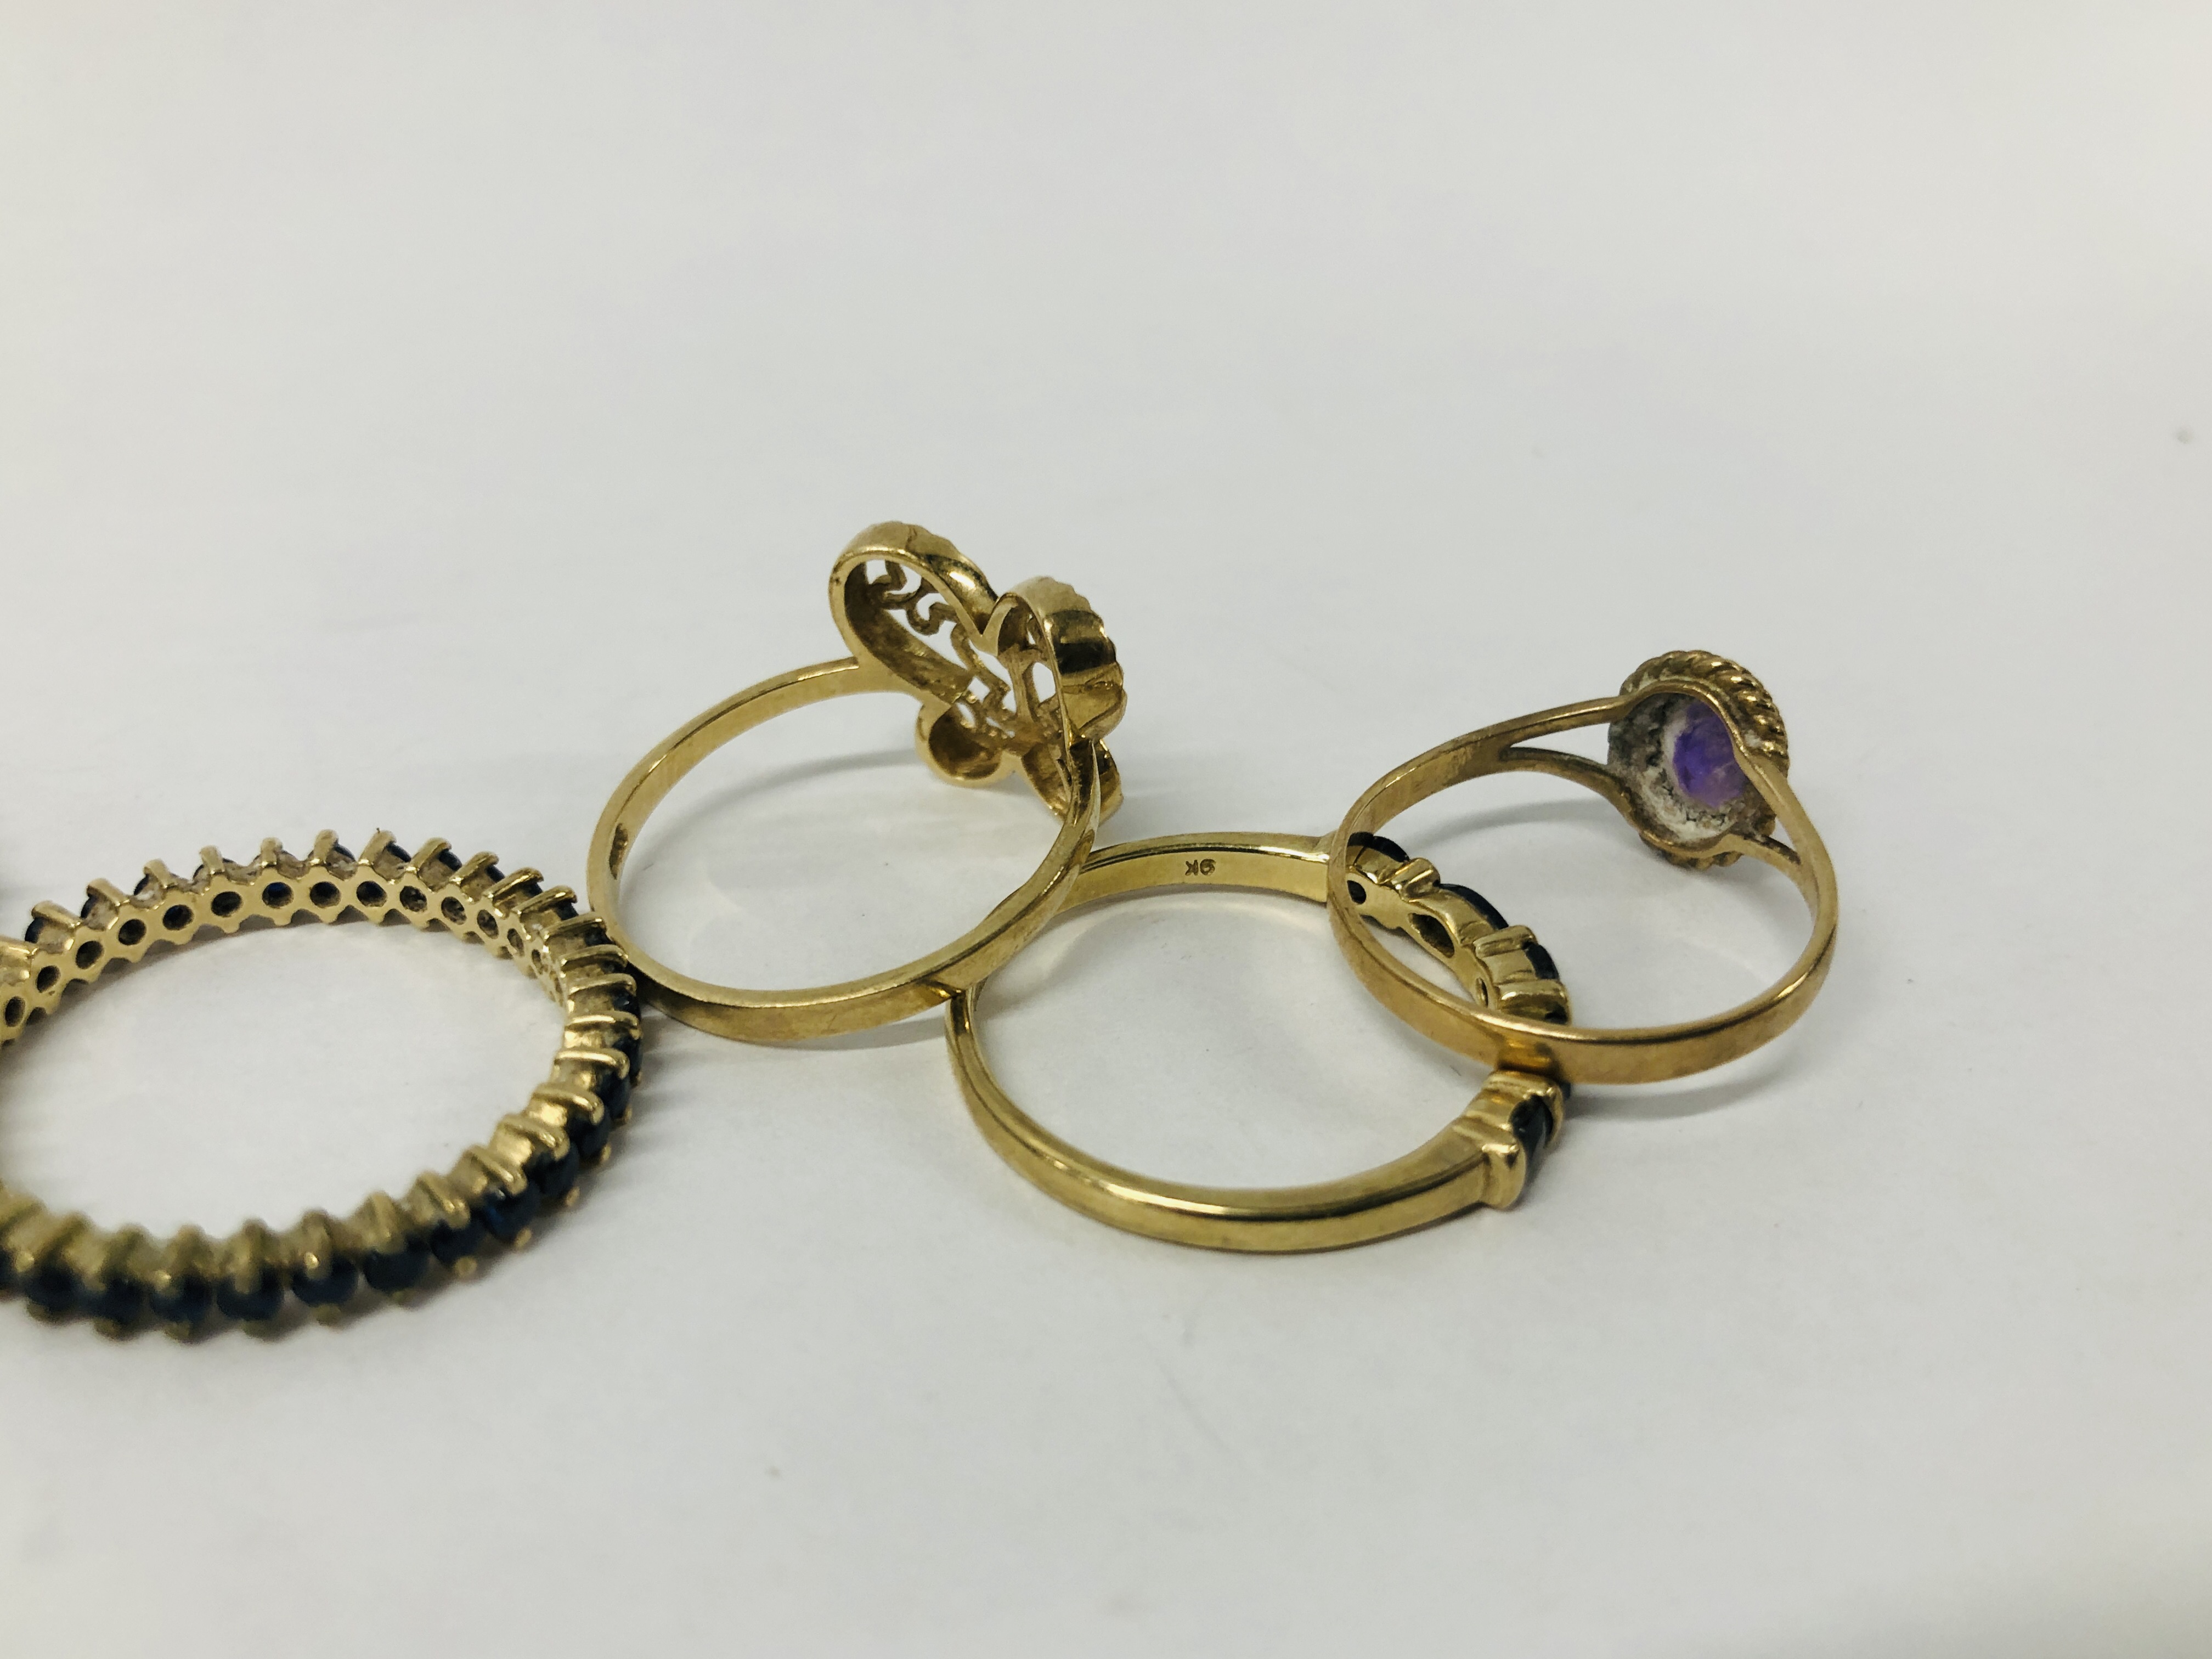 3 X 9CT. GOLD DRESS RINGS SET WITH SAPPHIRES (1 A/F), AN AMETHYST SET 9CT. GOLD AND A 9CT. - Image 11 of 12